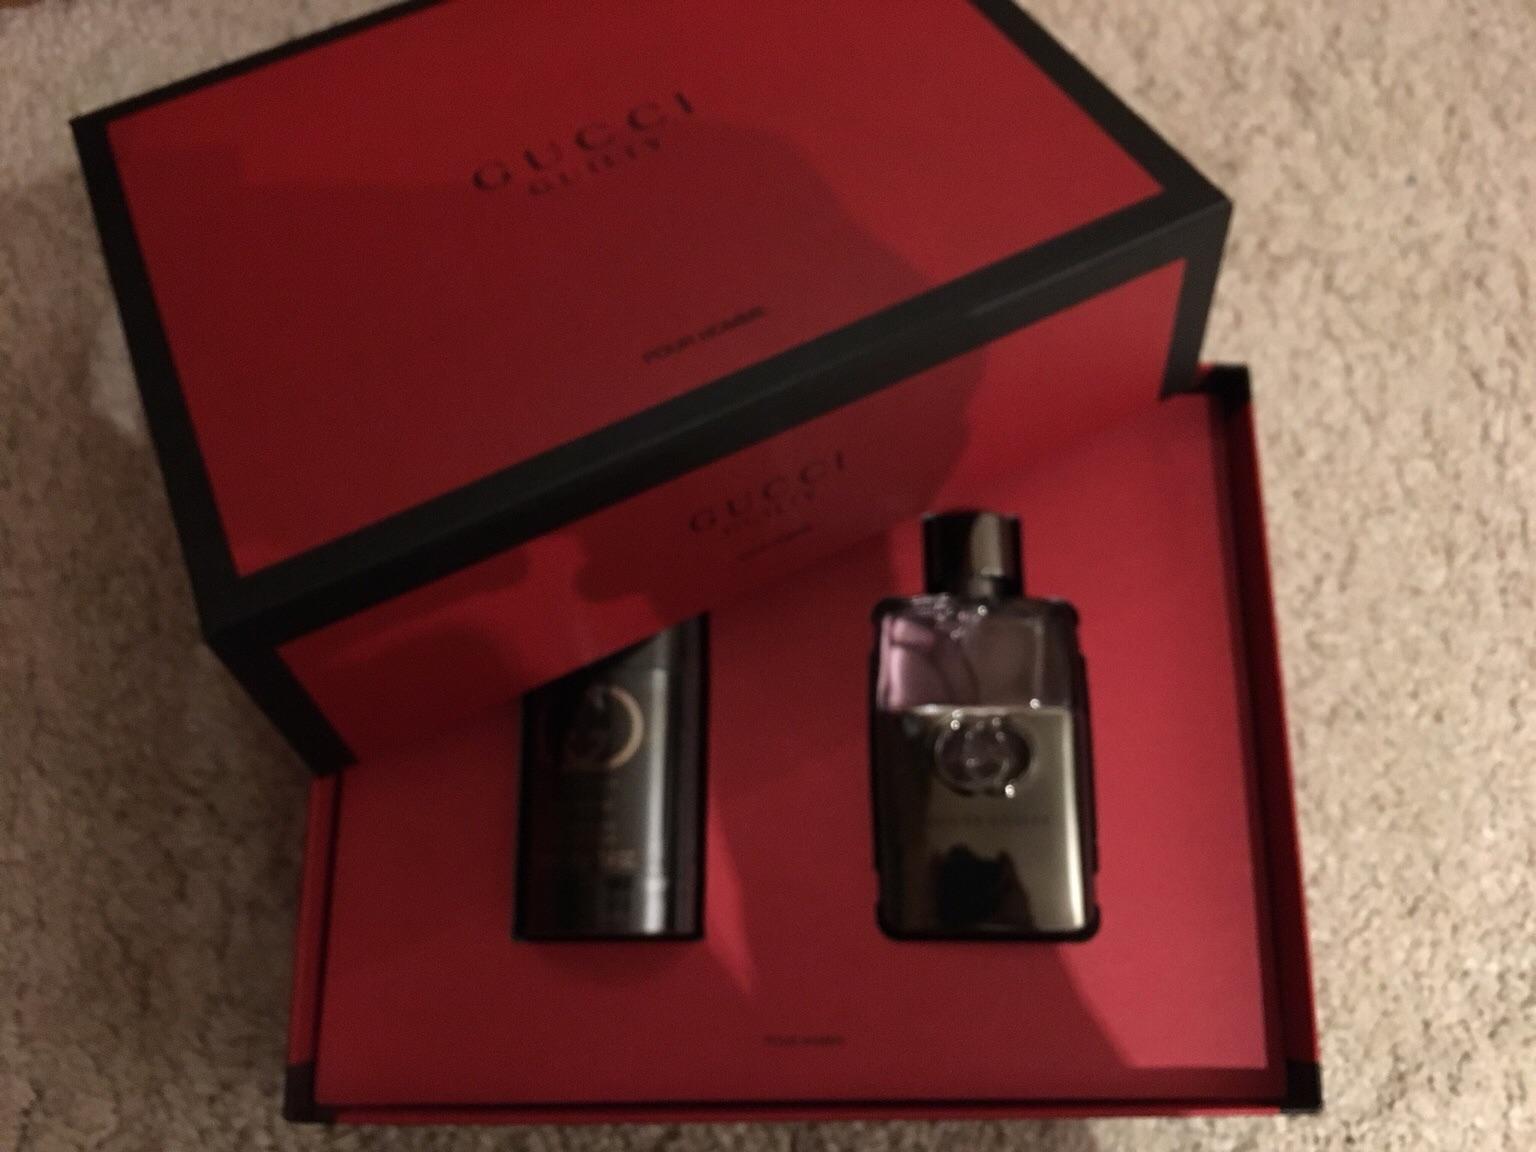 gucci guilty gift pack